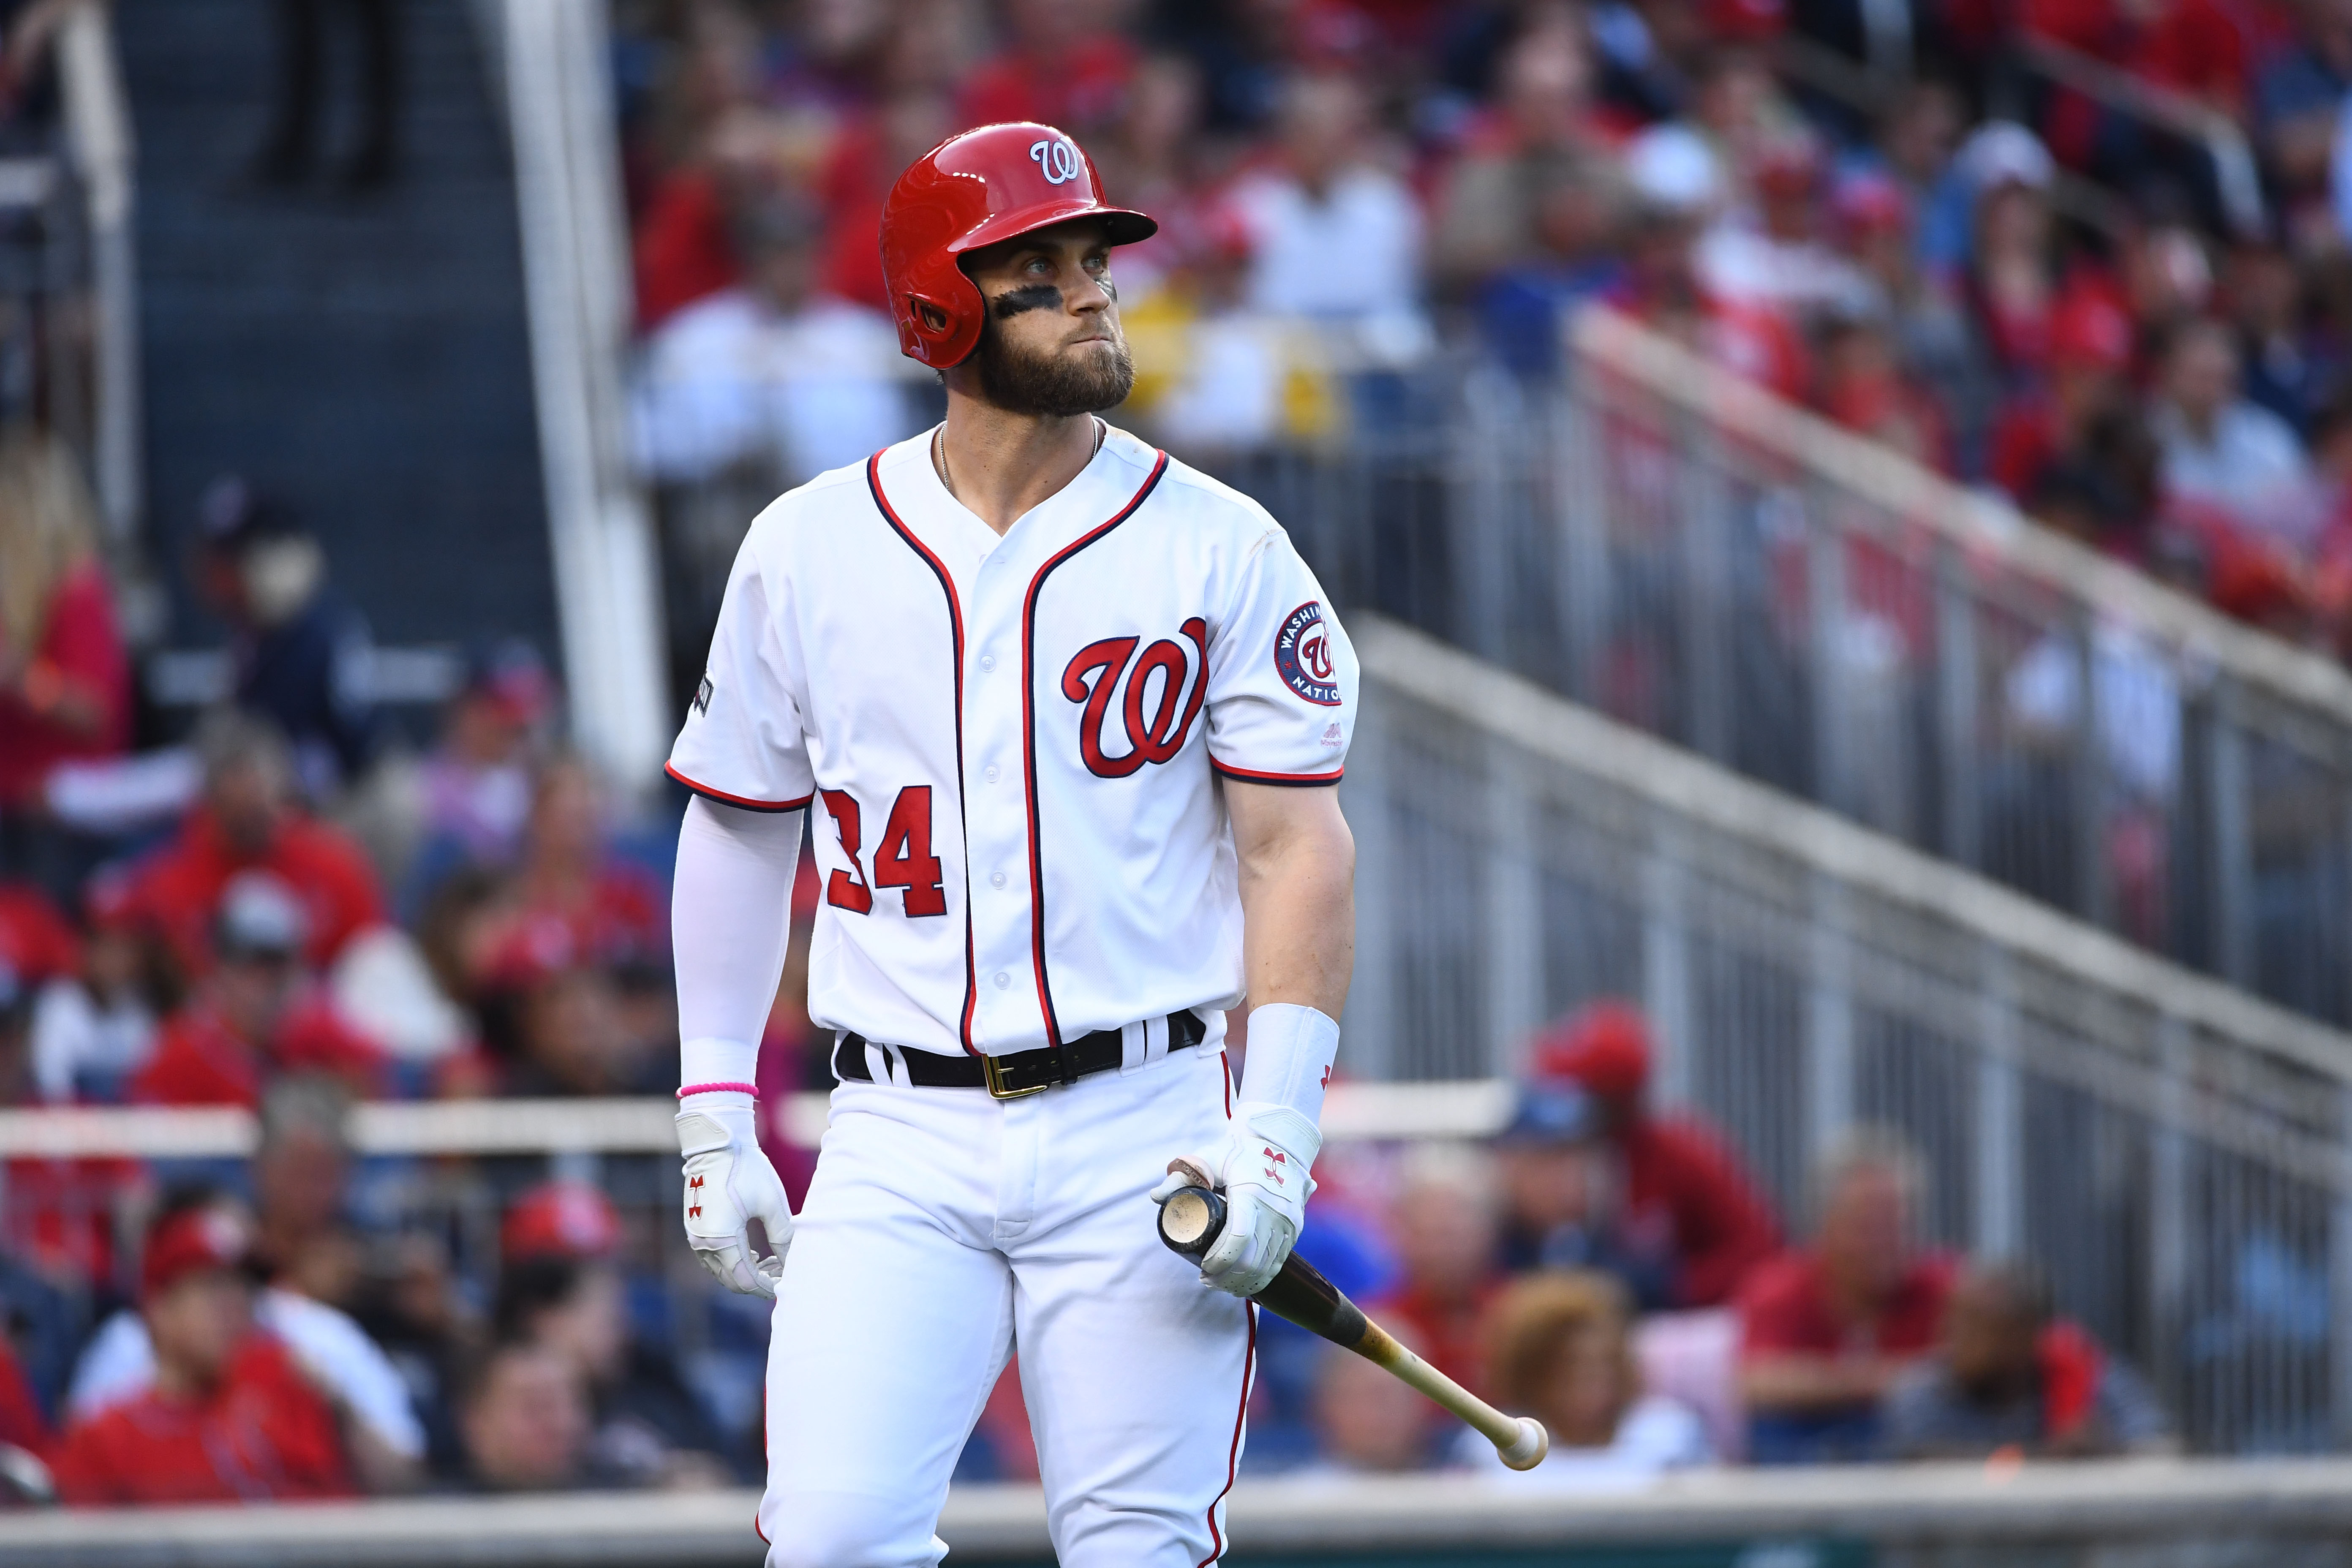 Nationals, taken aback by Bryce Harper's contract demands, set to move on  after '18